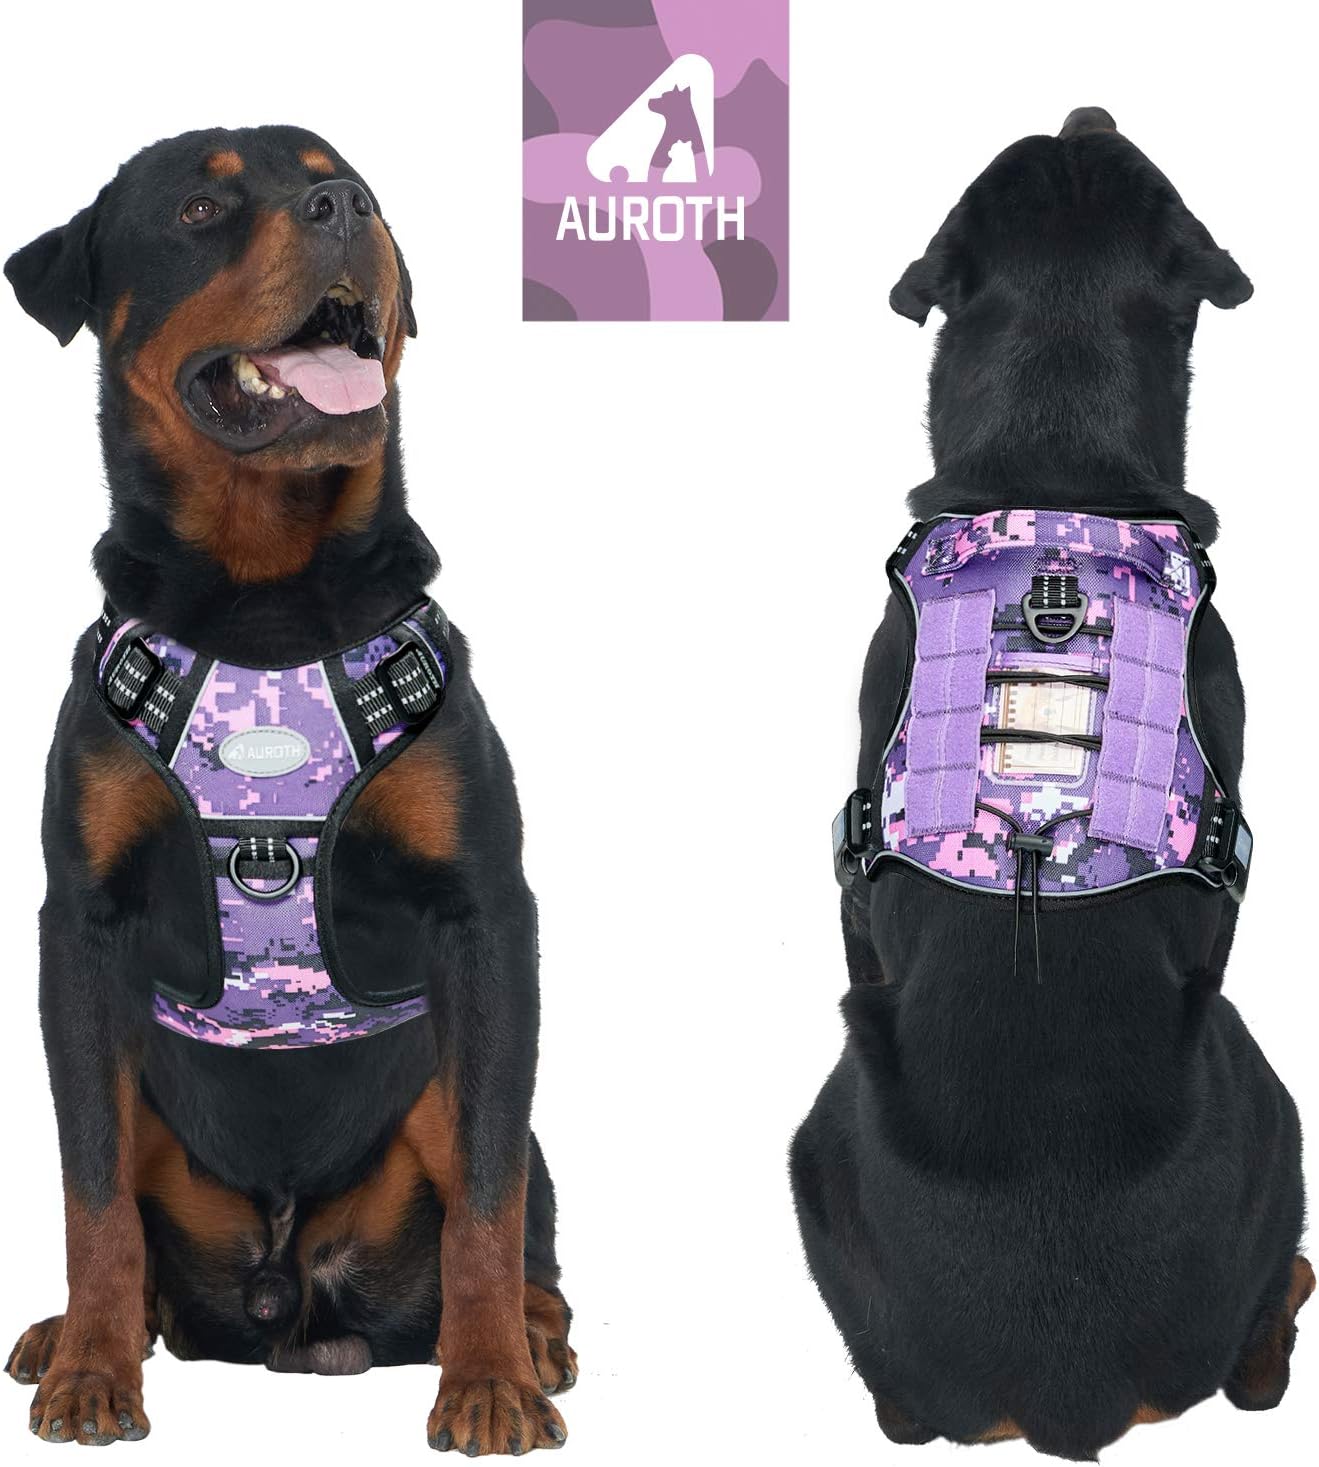 AUROTH Tactical Dog Harness for Large Dogs No Pull Adjustable Reflective K9 Working Training Easy Control Pet Vest Military Service Harnesses Woodland Camo L